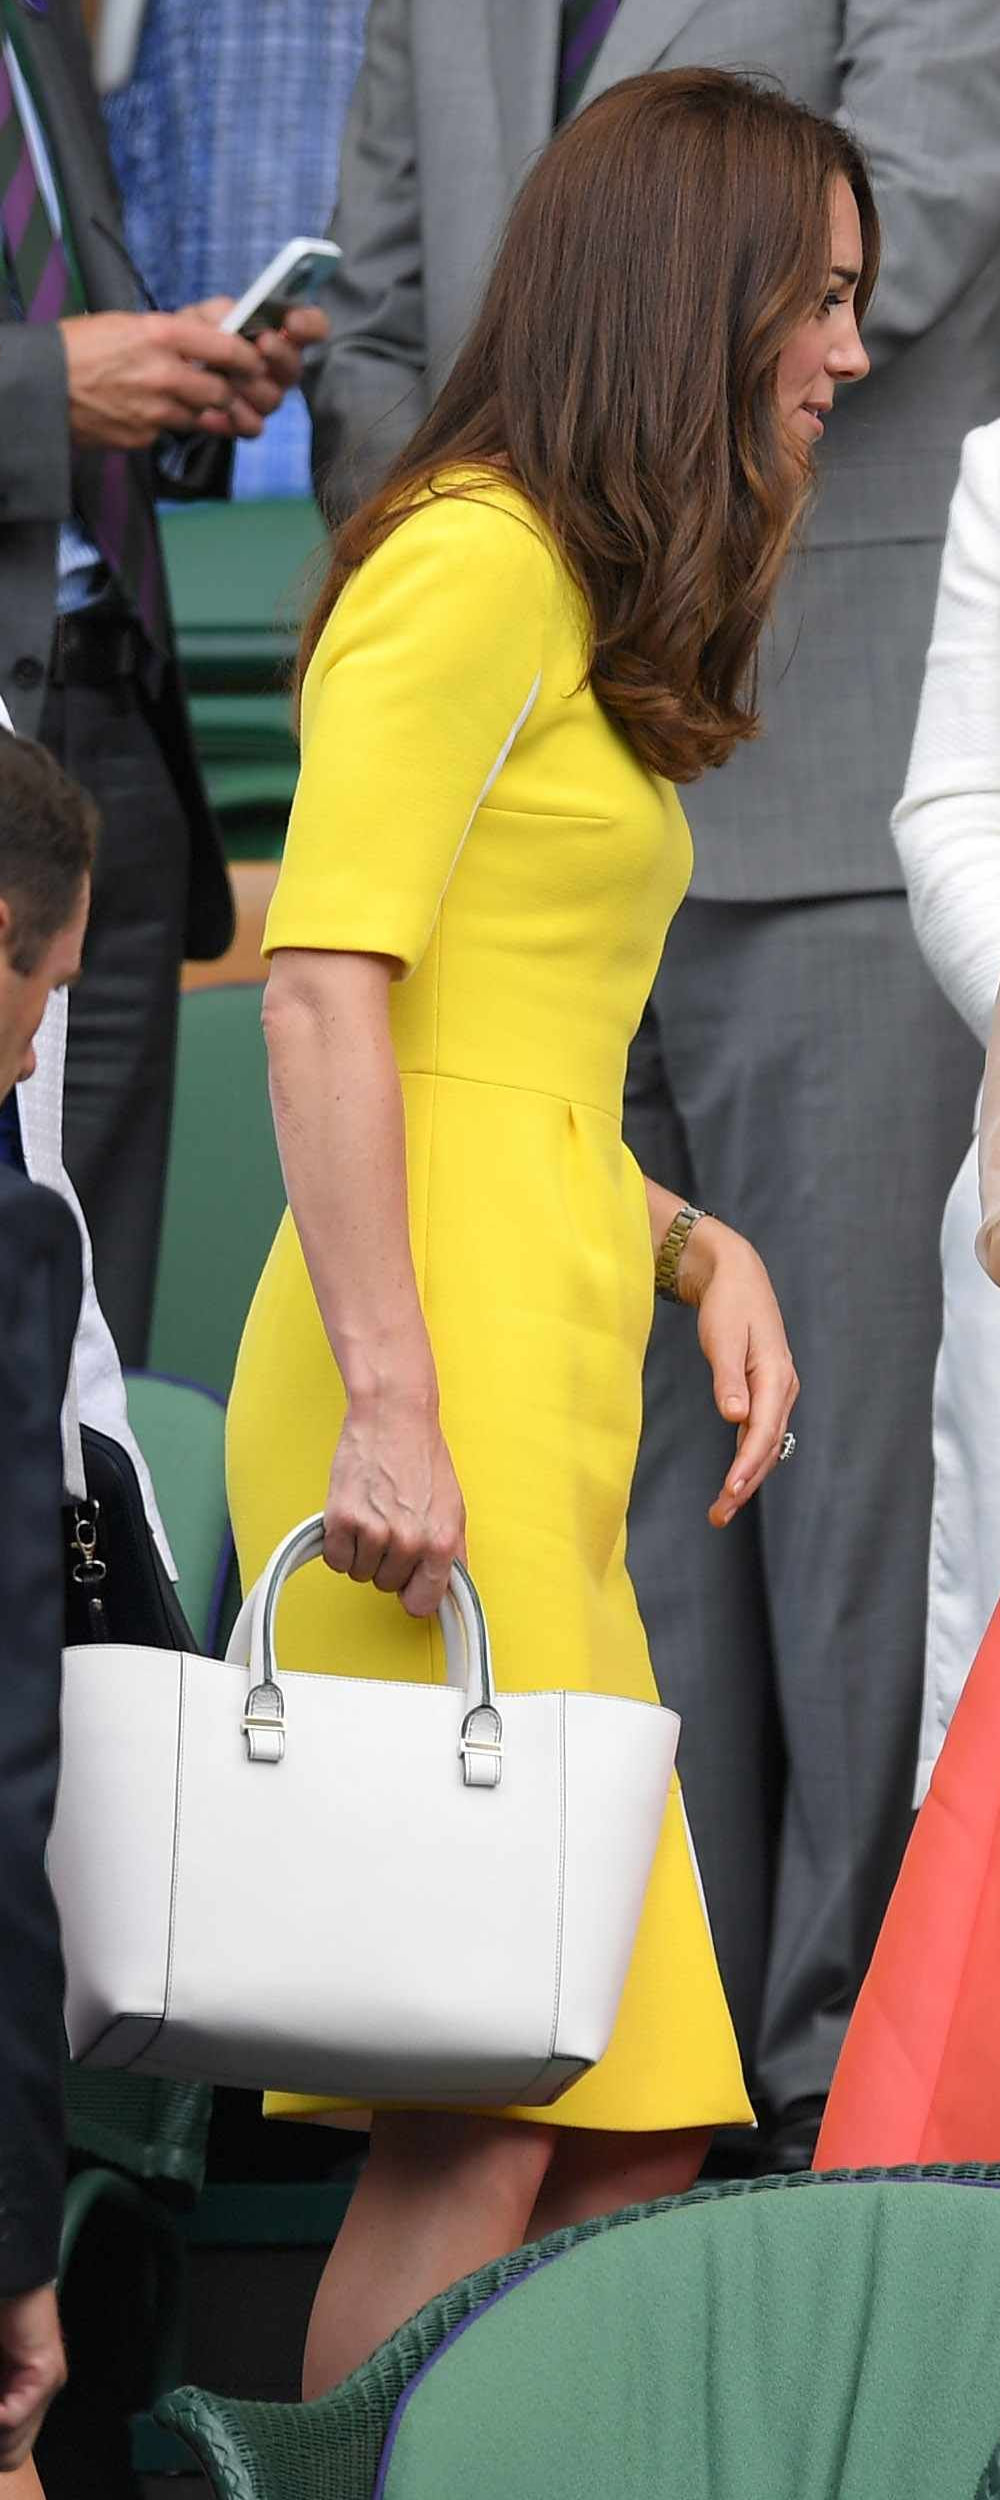 Victoria Beckham Quincy Moonshine White Tote as seen on Kate Middleton, The Duchess of Cambridge.